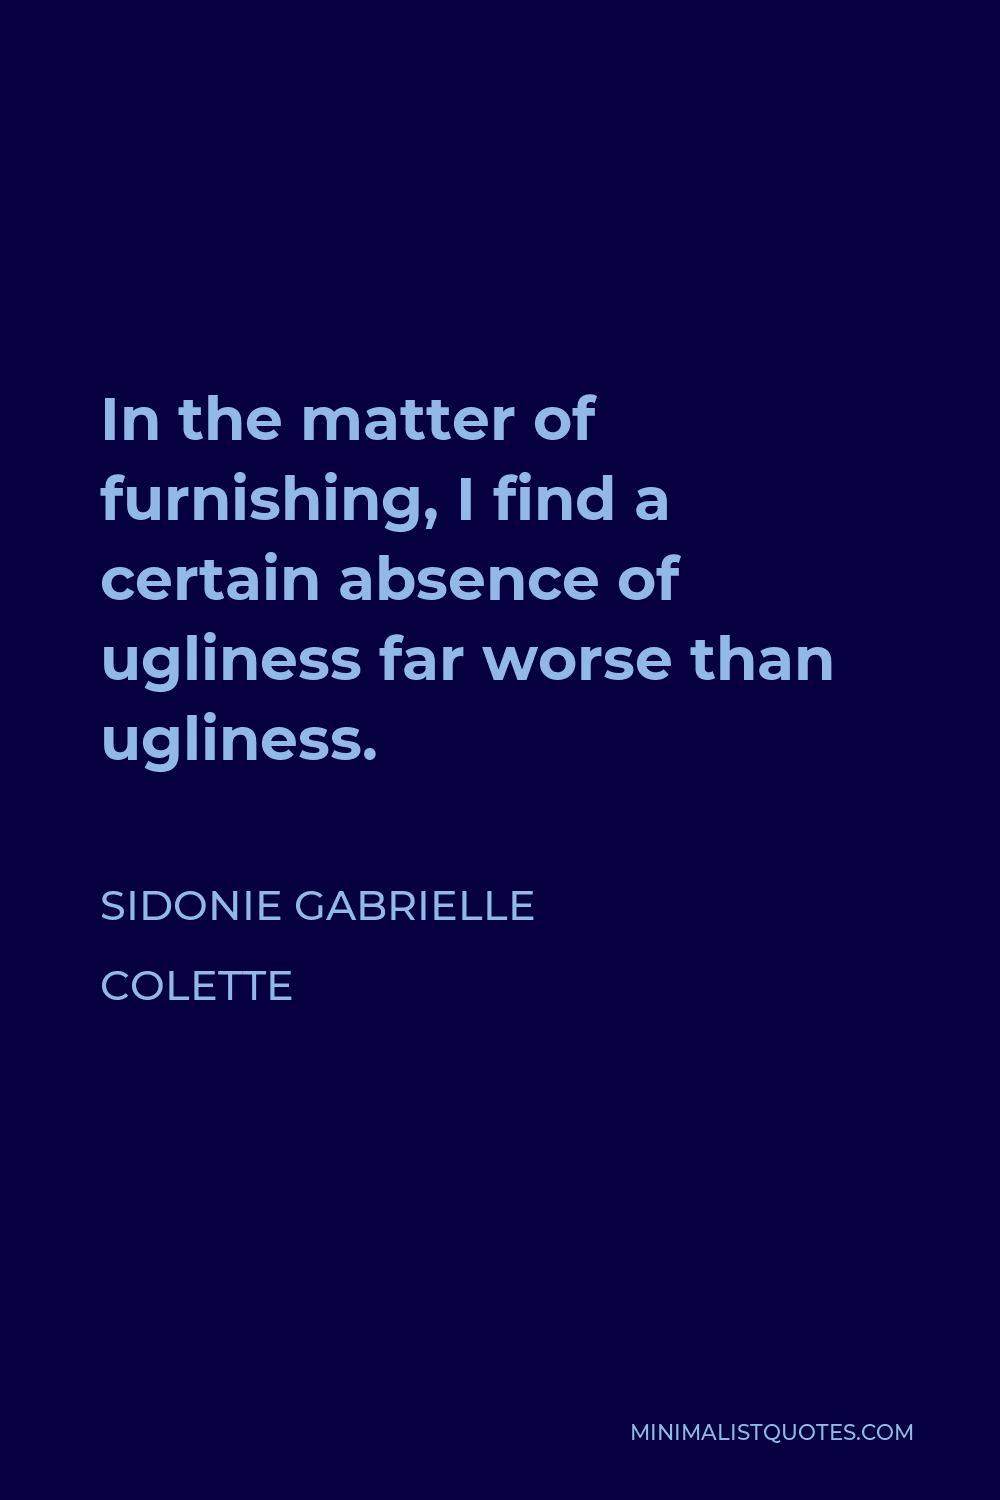 Sidonie Gabrielle Colette Quote - In the matter of furnishing, I find a certain absence of ugliness far worse than ugliness.